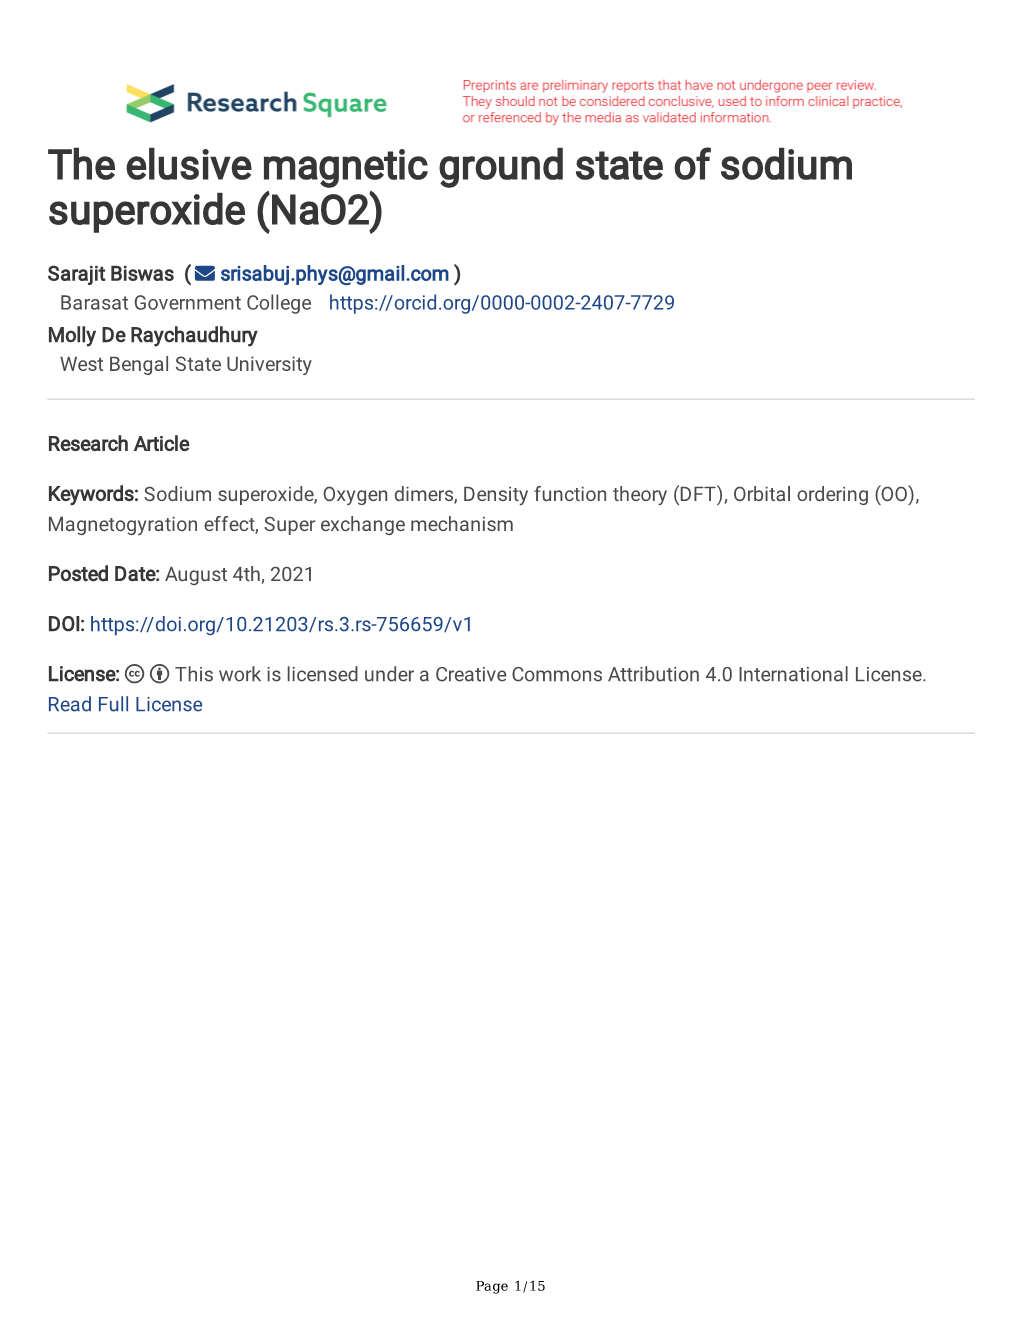 The Elusive Magnetic Ground State of Sodium Superoxide (Nao2)